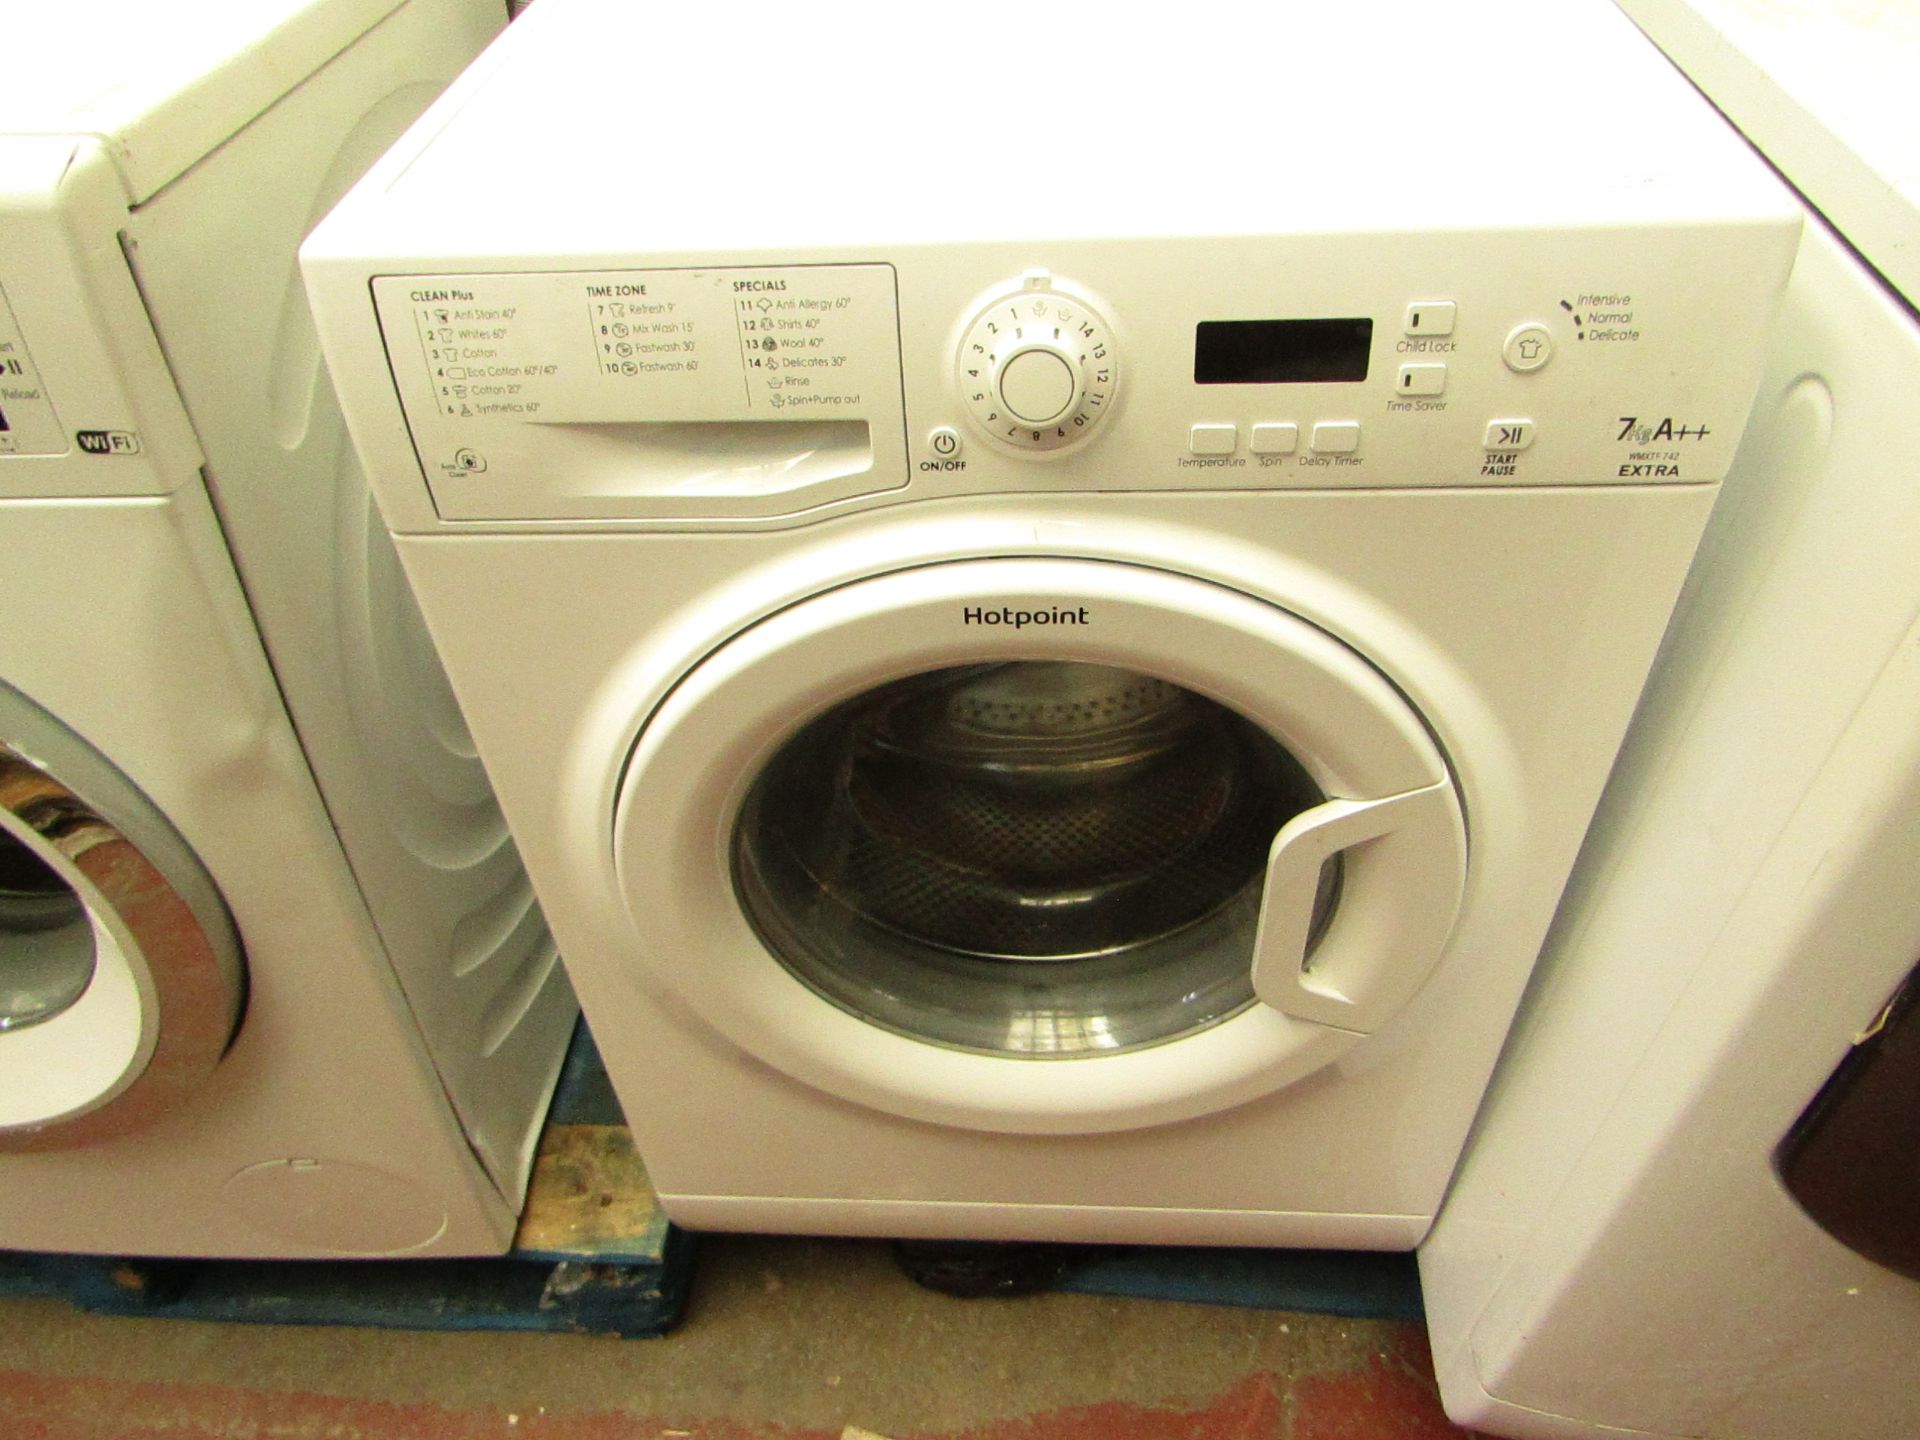 Hotpoint 7kg Washing Machine.No Major Damage But Unable To Test as no plug